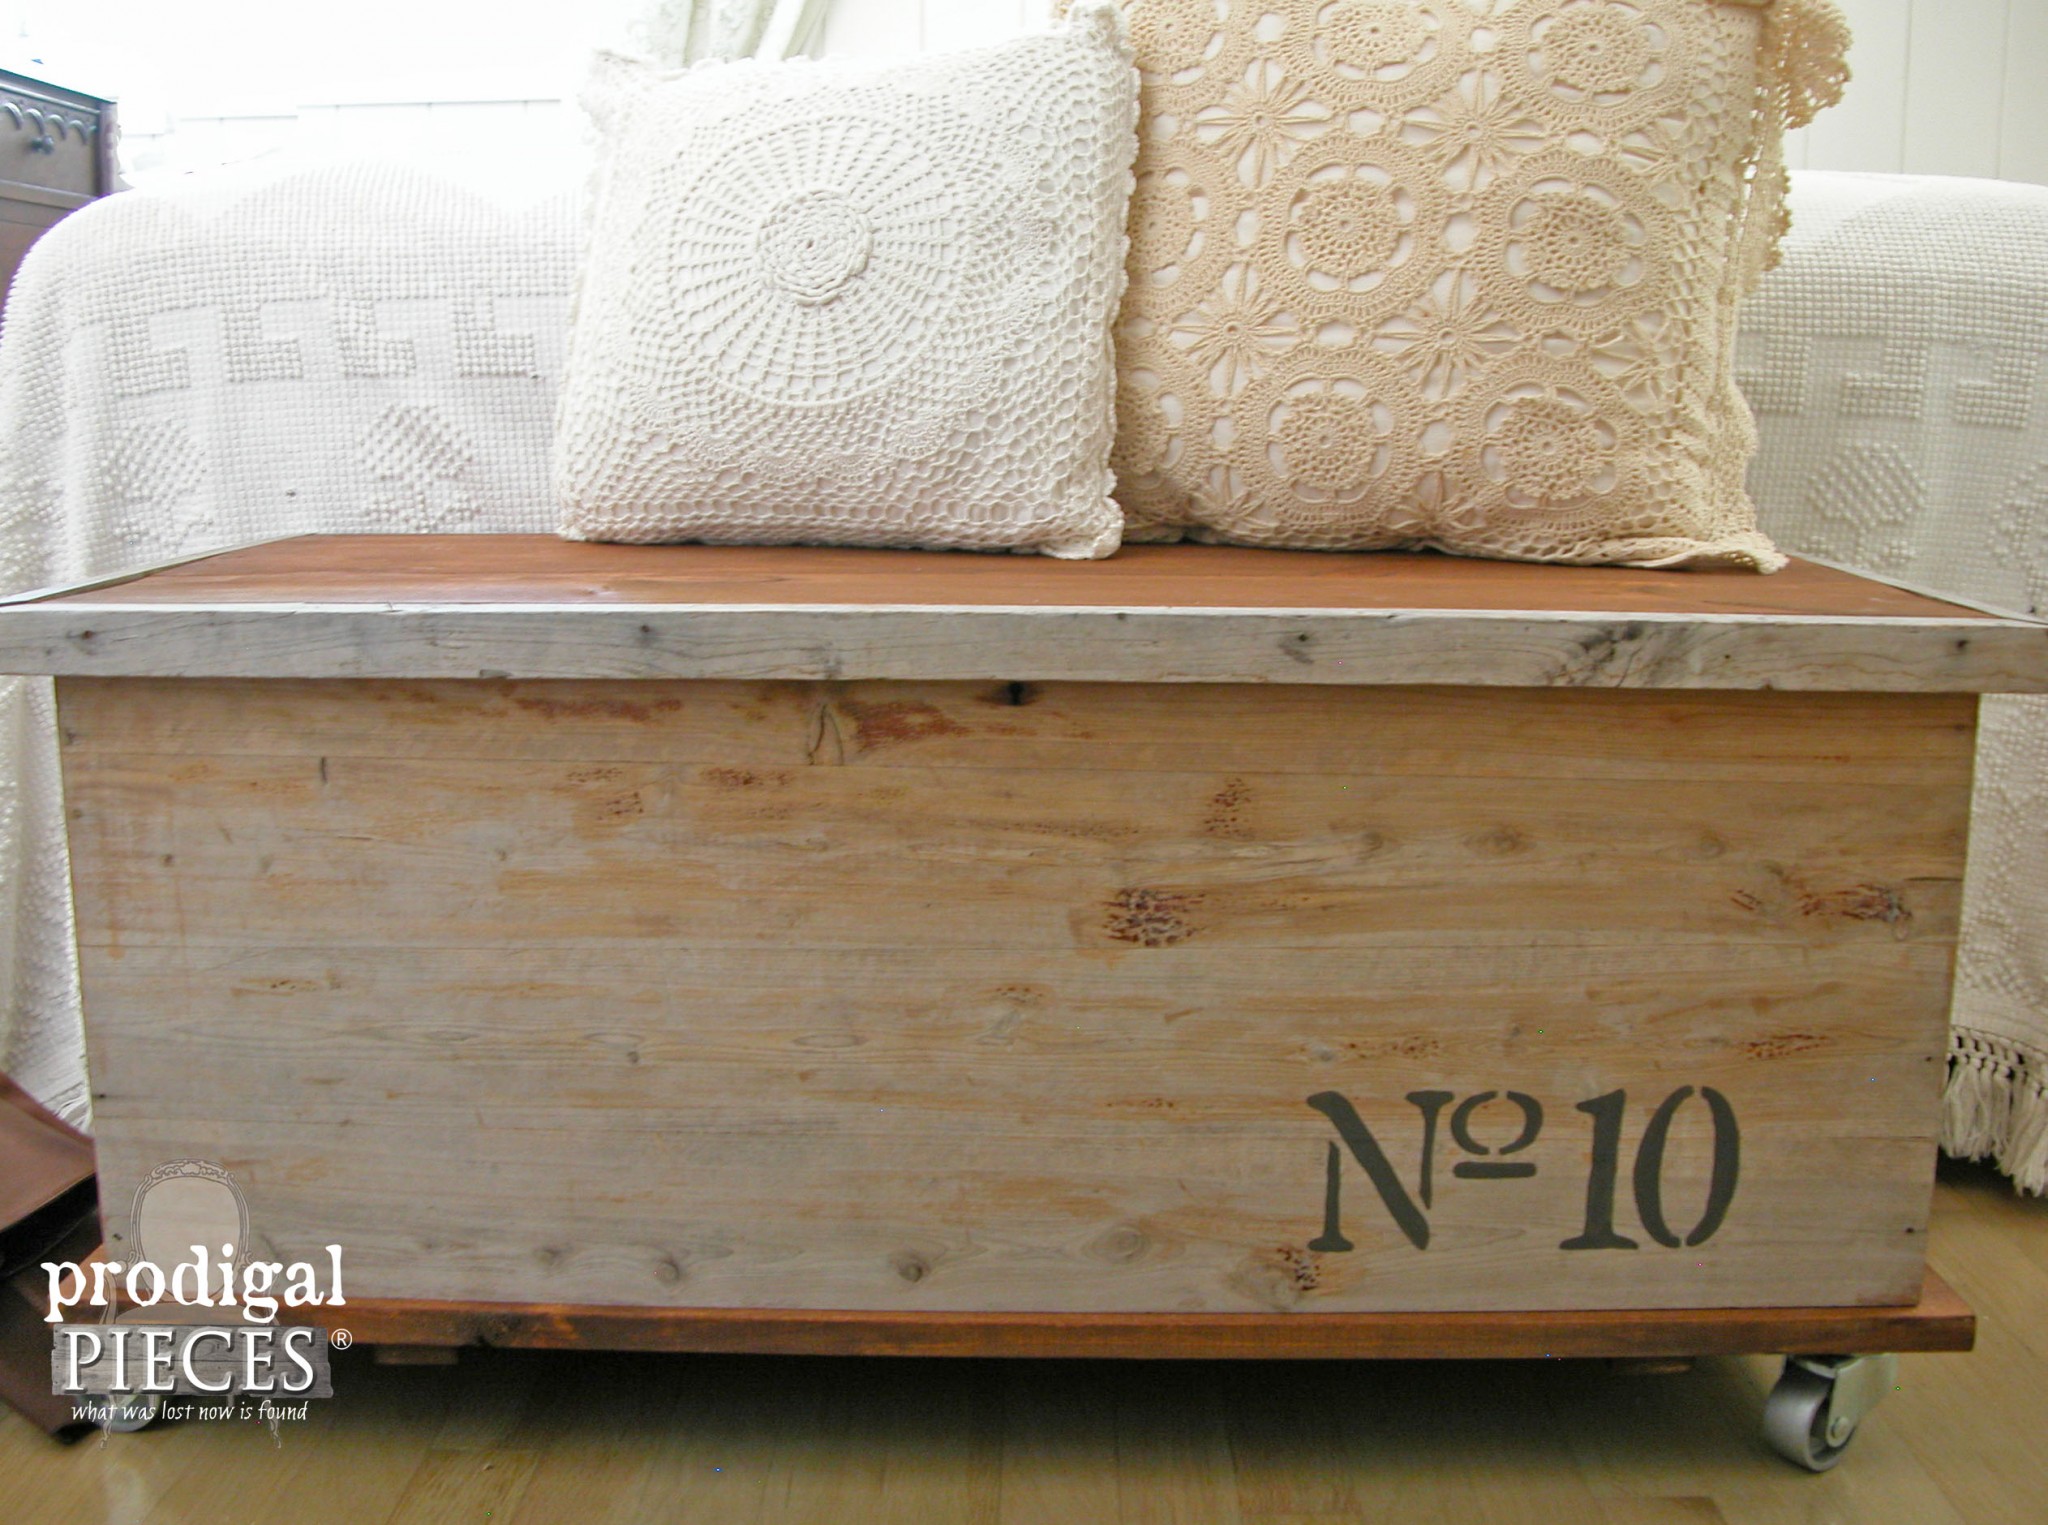 Industrial Chic Cedar Chest in Farmhouse Bedroom After Curbside Makeover by Prodigal Pieces | www.prodigalpieces.com